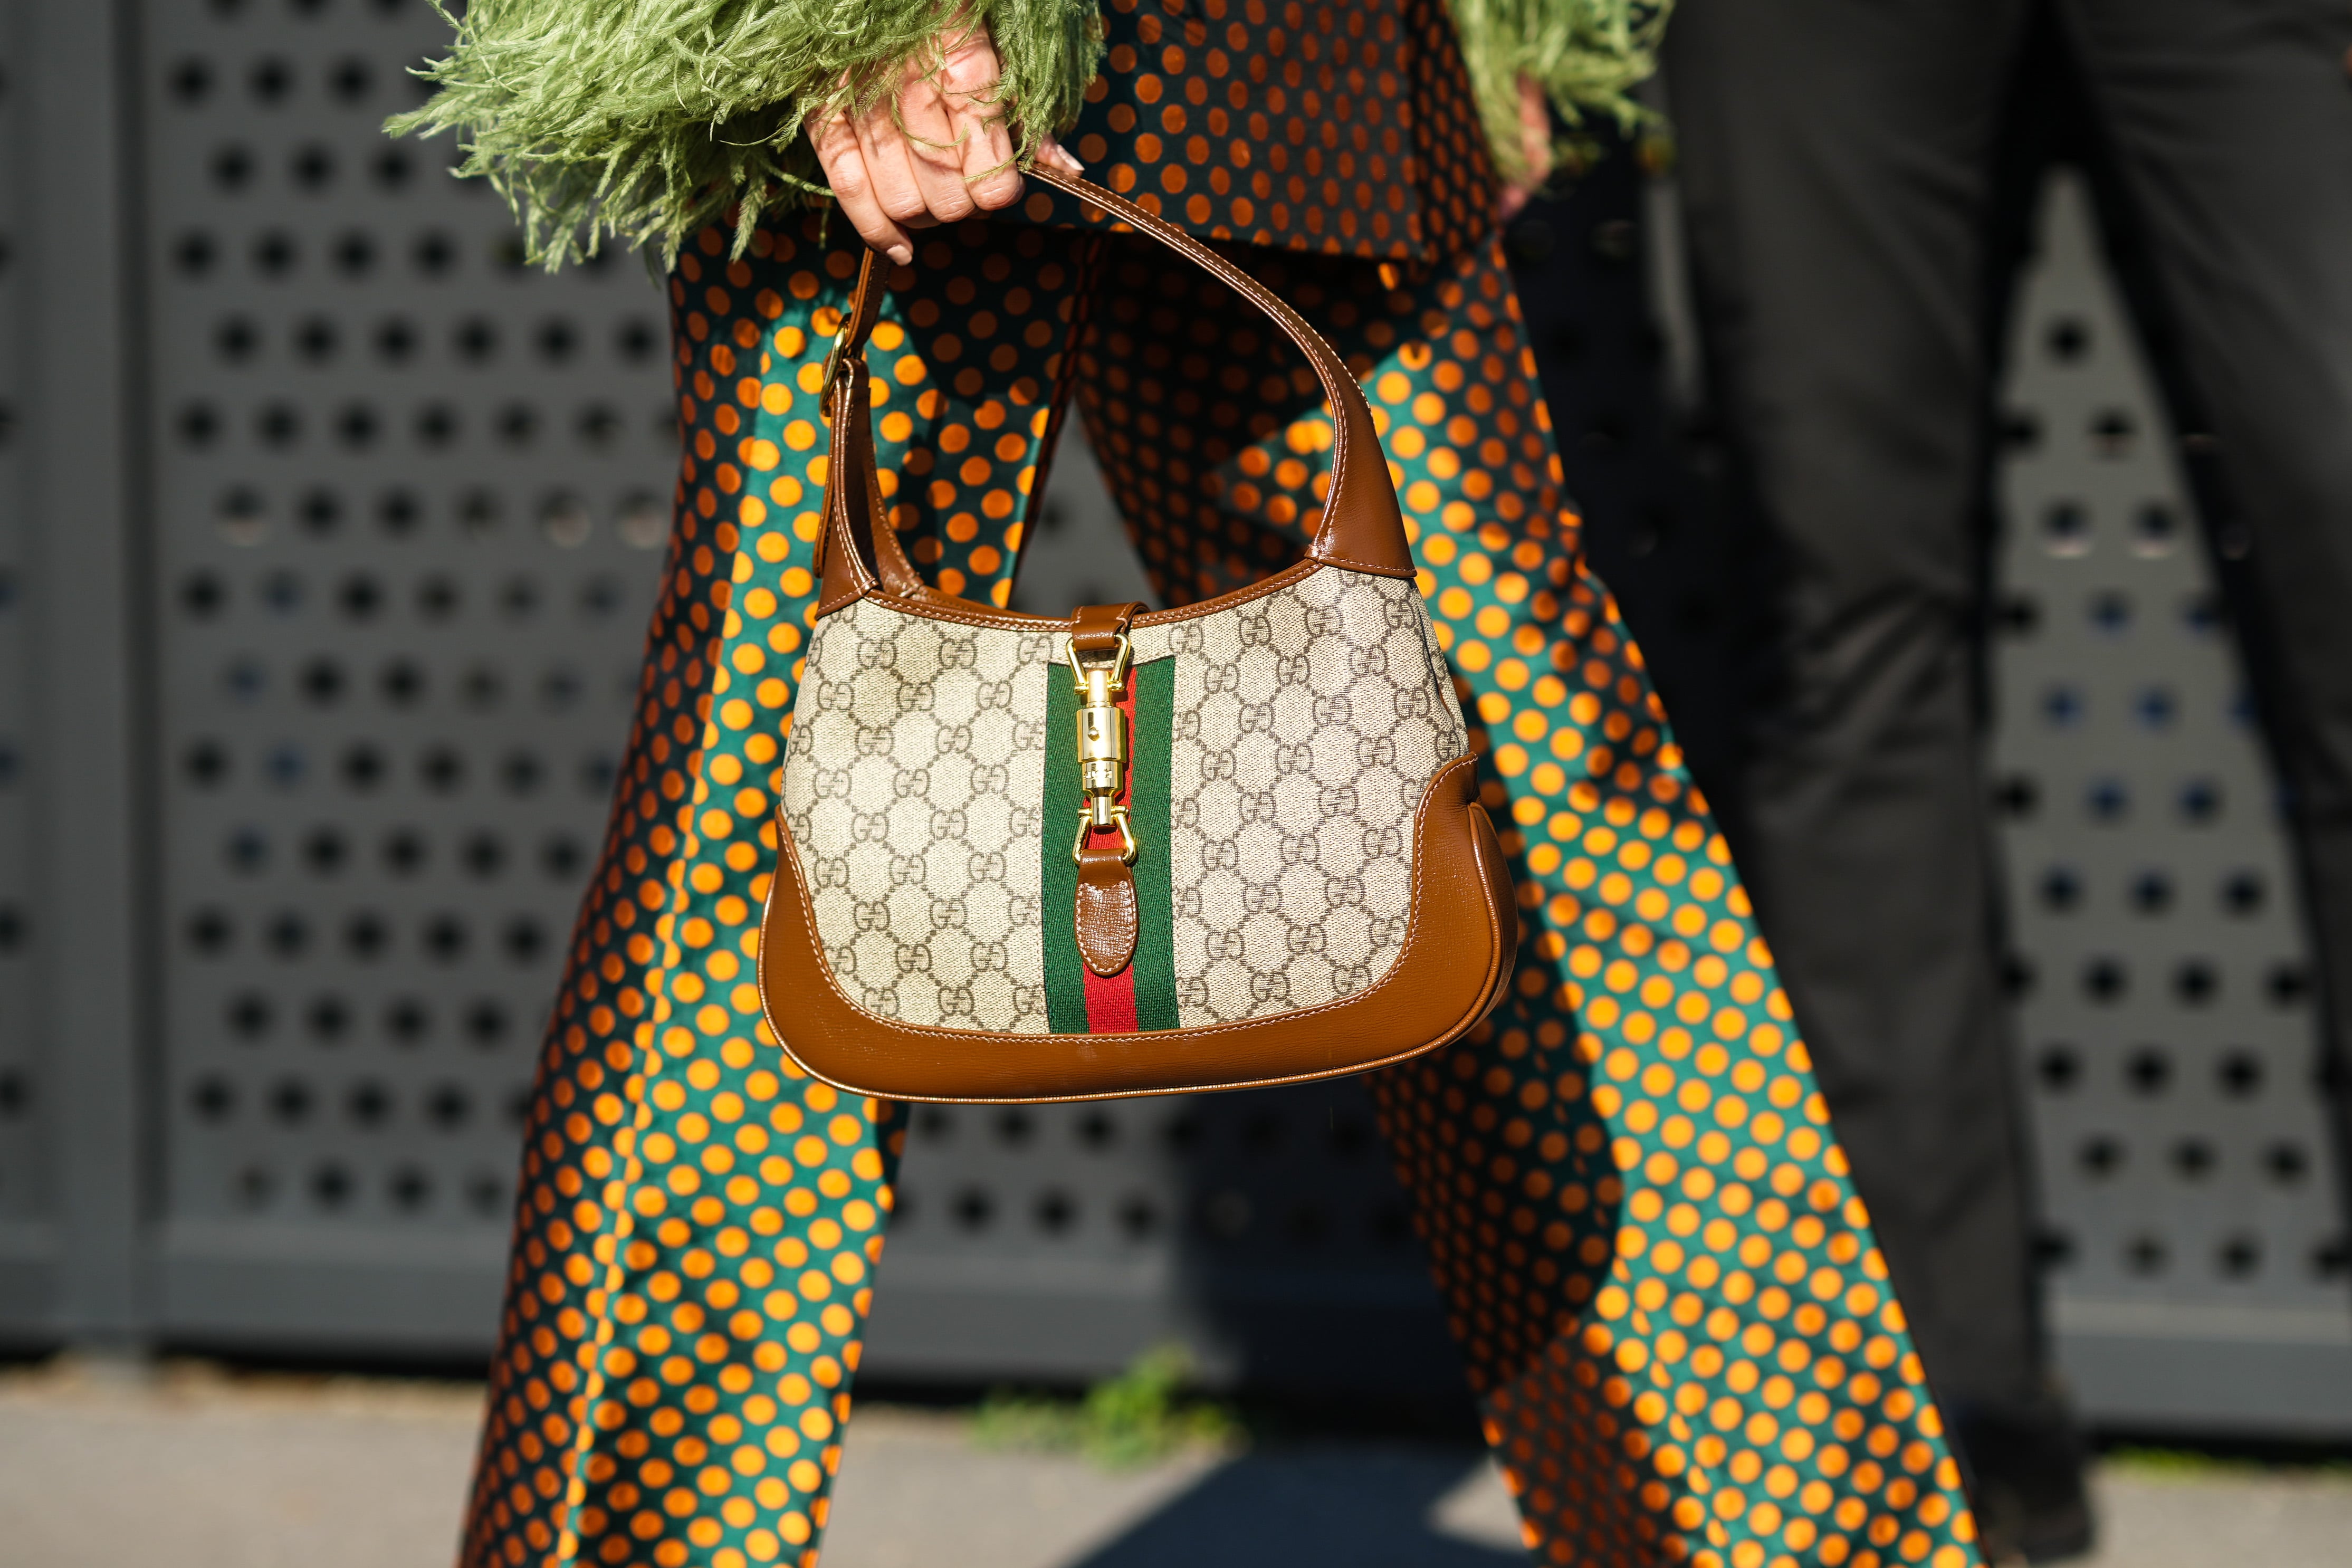 Gucci Bags 2022 - The Best Rated From This Year So Far! 